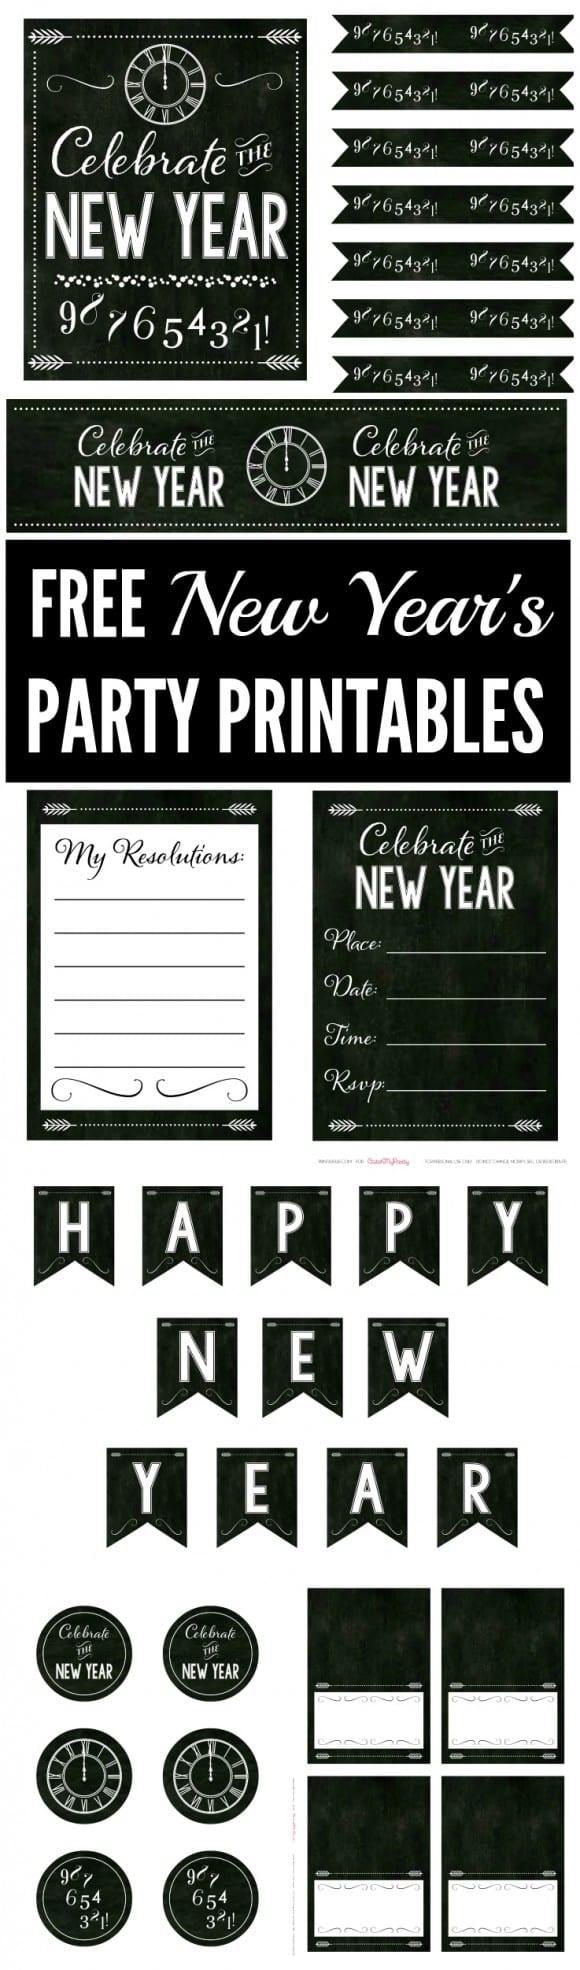 Free Chalkboard New Year's Party Printables | CatchMyParty.com